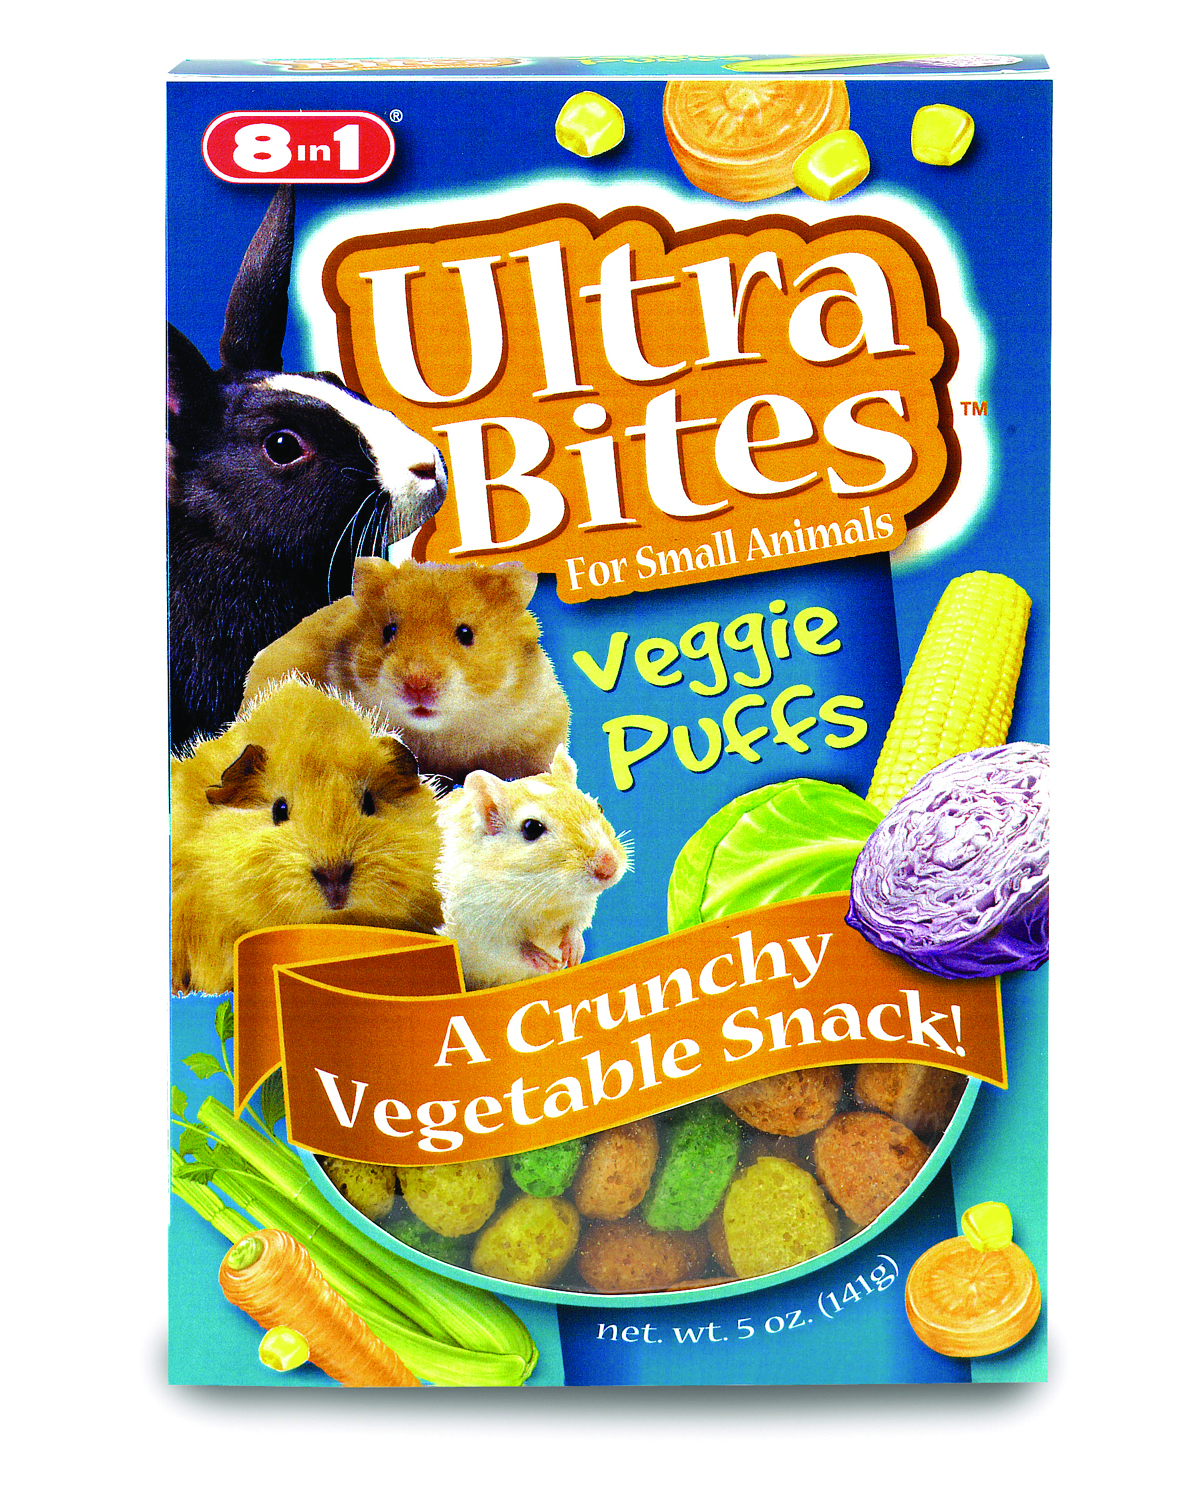 ULTRA BITES VEGGIE PUFFS FOR SMALL ANIMALS